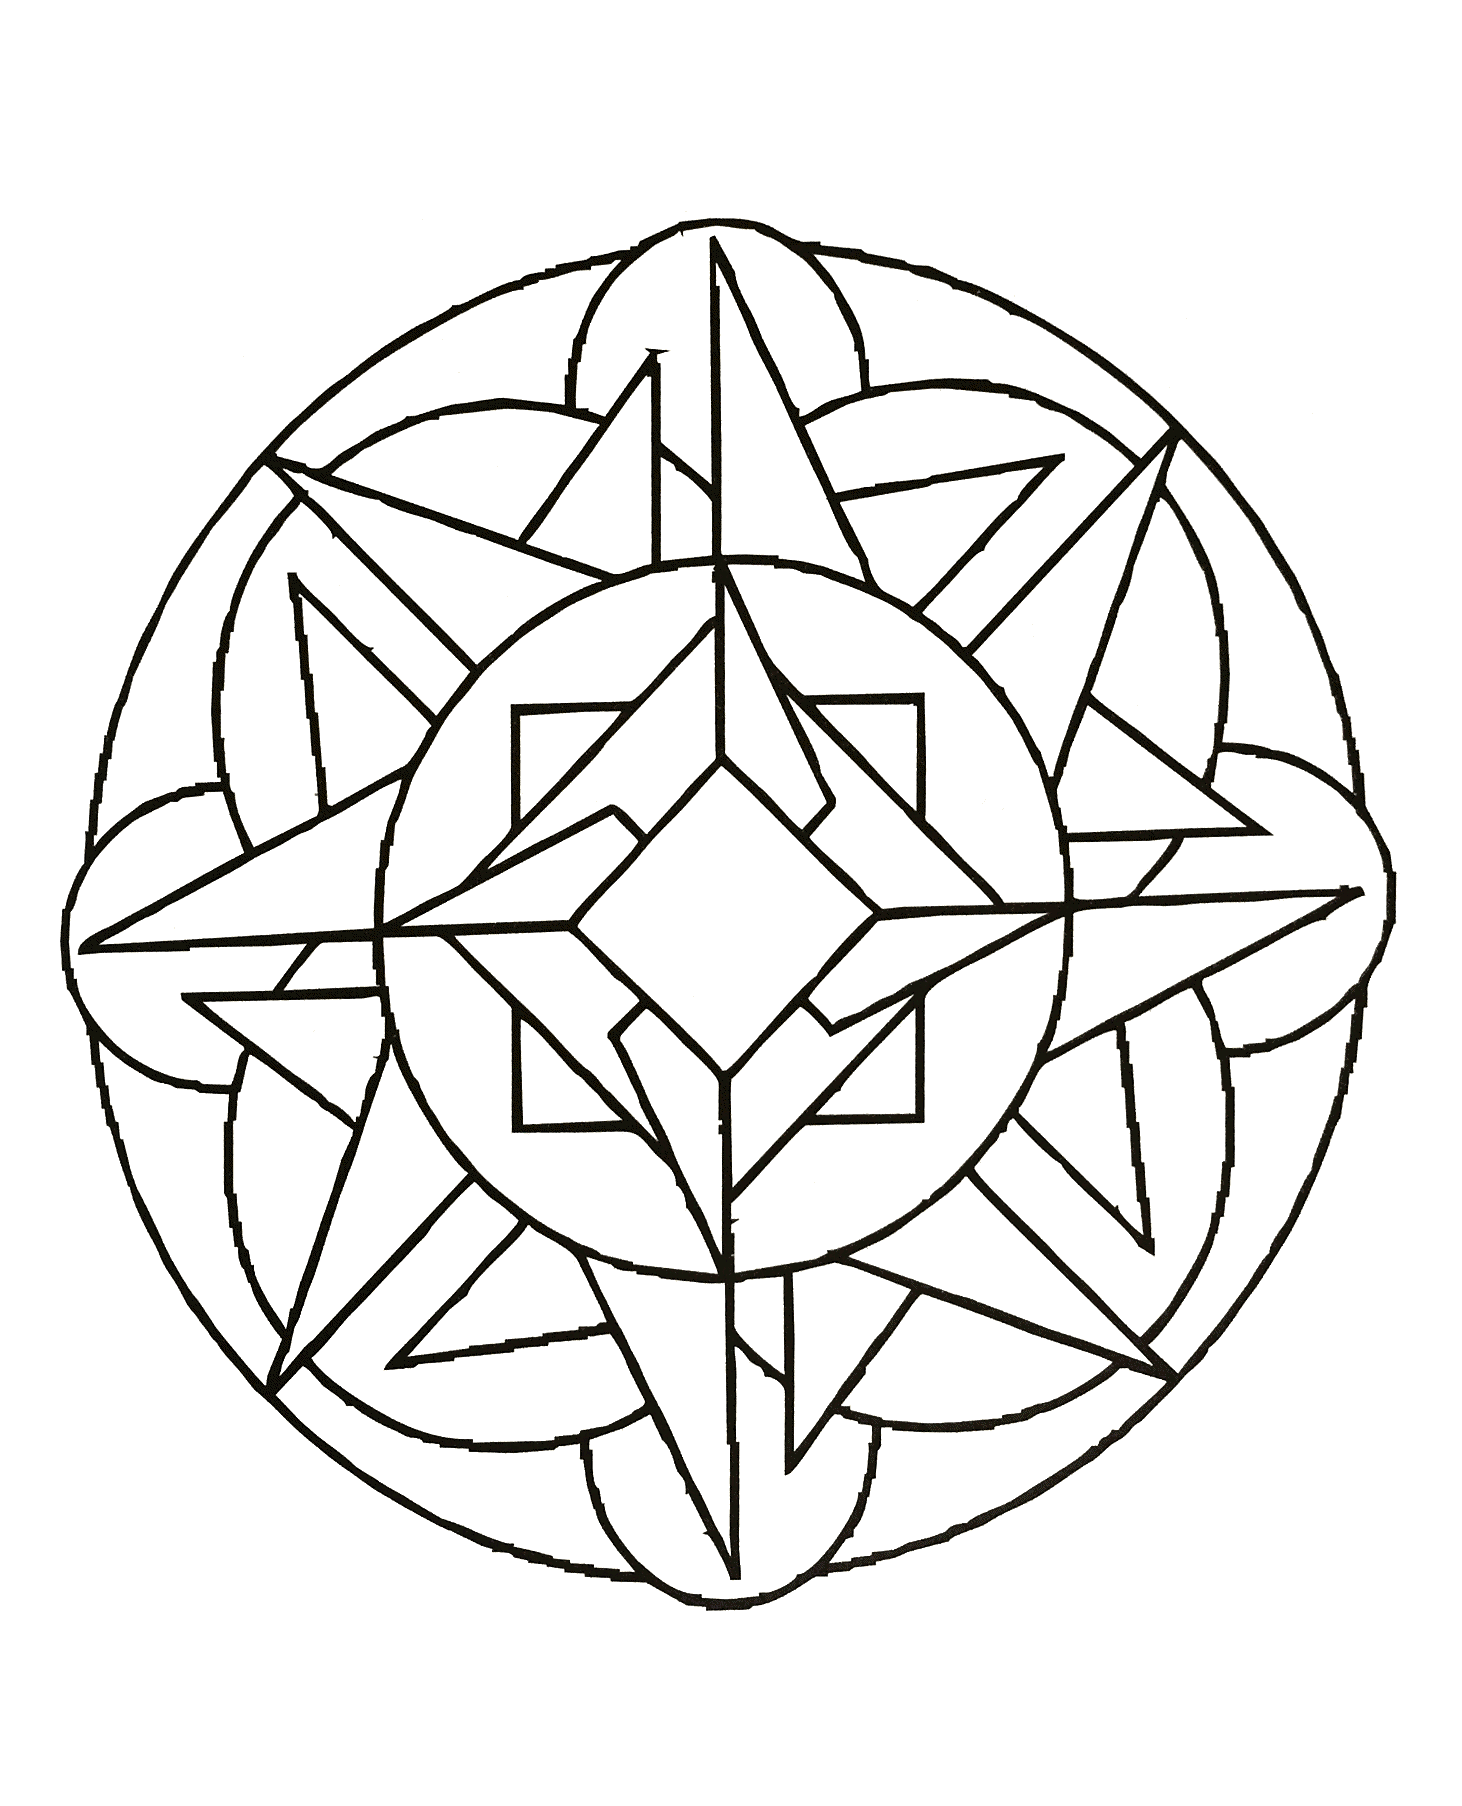 A mandala coloring page for the youngest, low level of difficulty. Coloring can help your children to learn the skill of patience. It allows your children to be relaxed and comfortable while creating a piece of art.